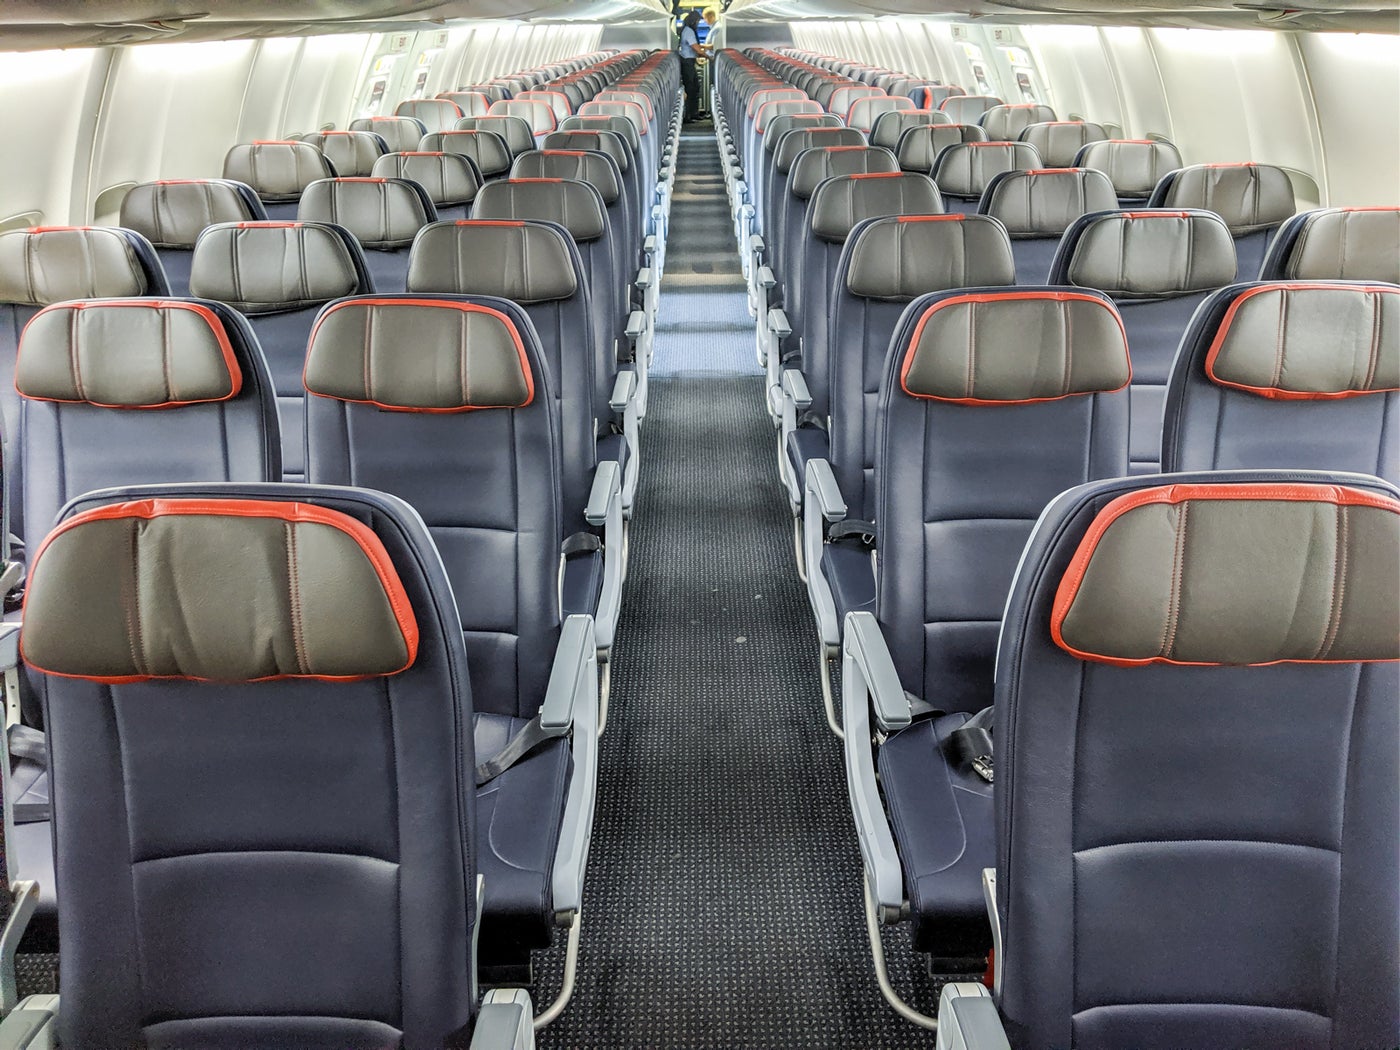 A beginner's guide to choosing seats on American Airlines